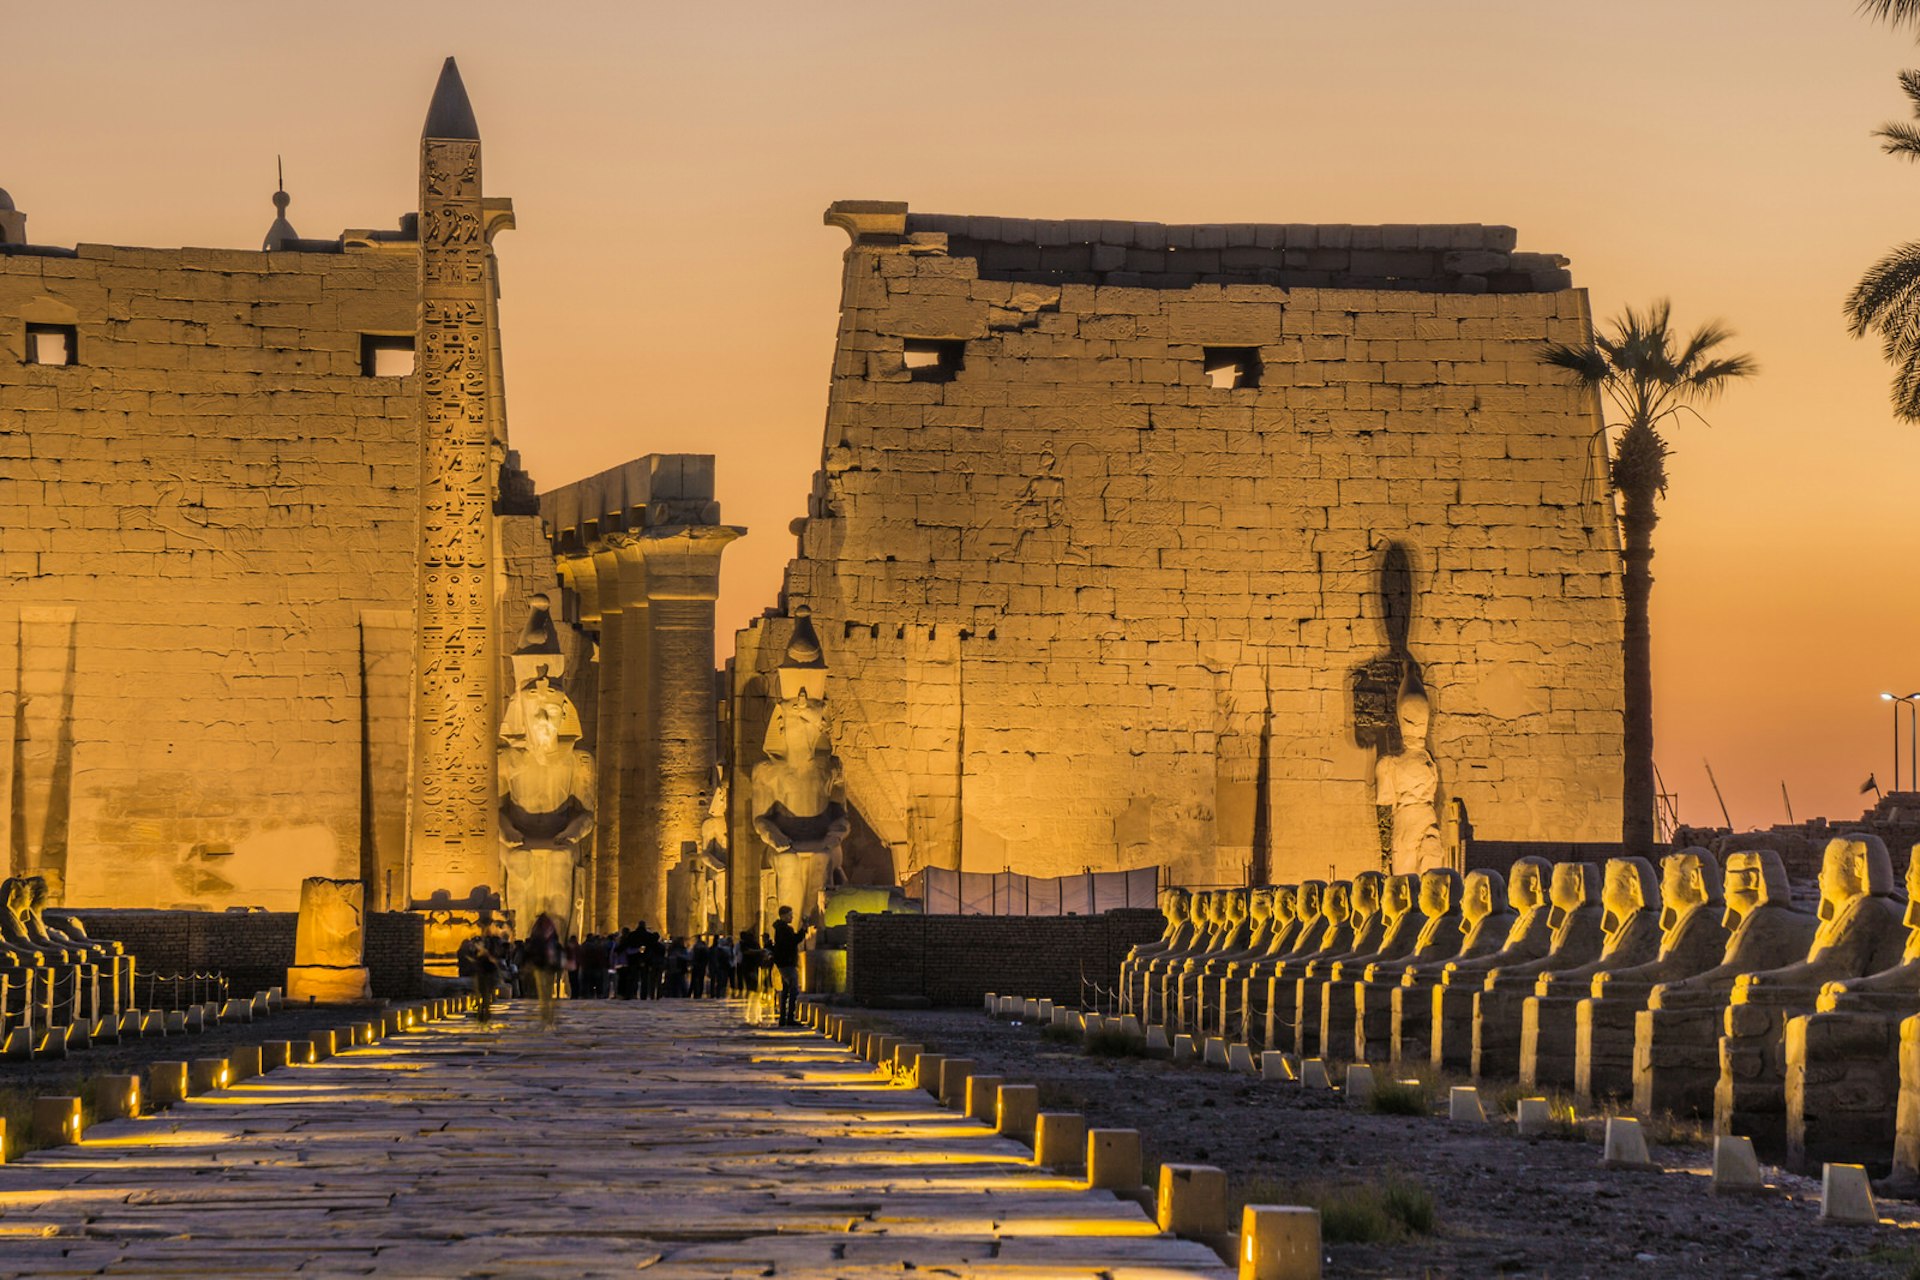 Sunset at Luxor Temple. Image by Prin Adulyatham / Shutterstock